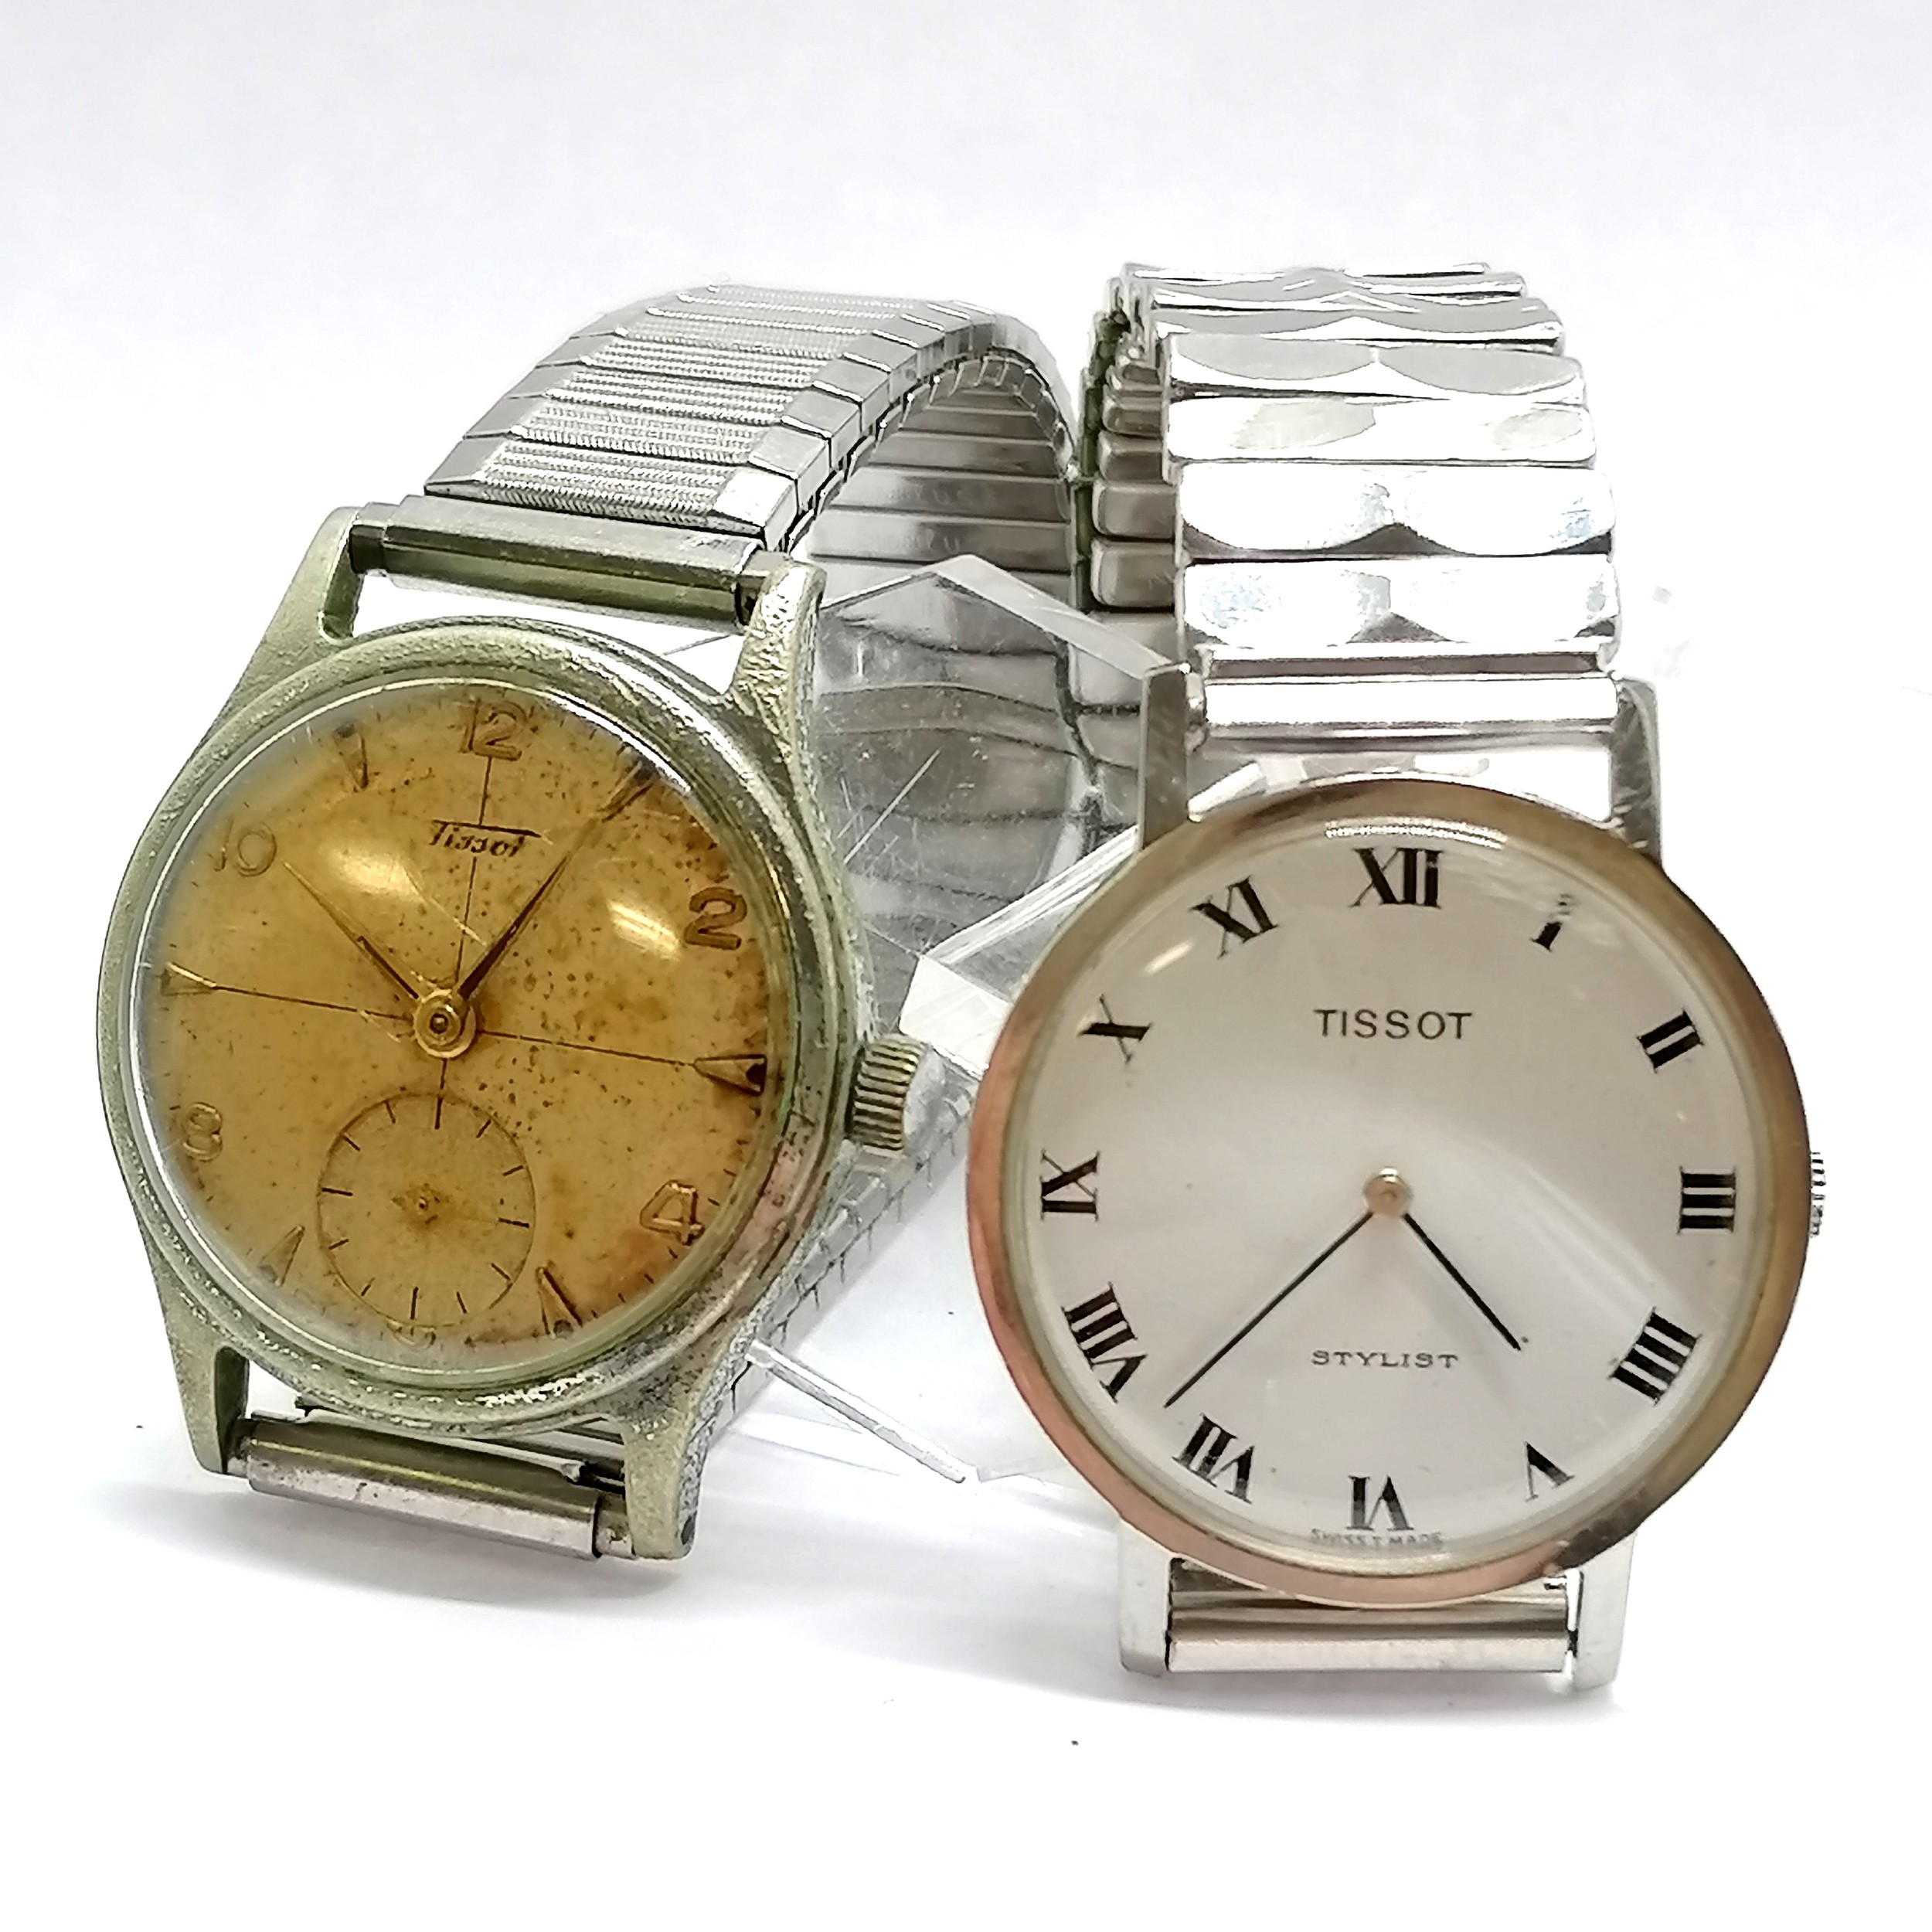 2 x Tissot manual wind wristwatches - largest 32mm and has deterioration to dial and case - both